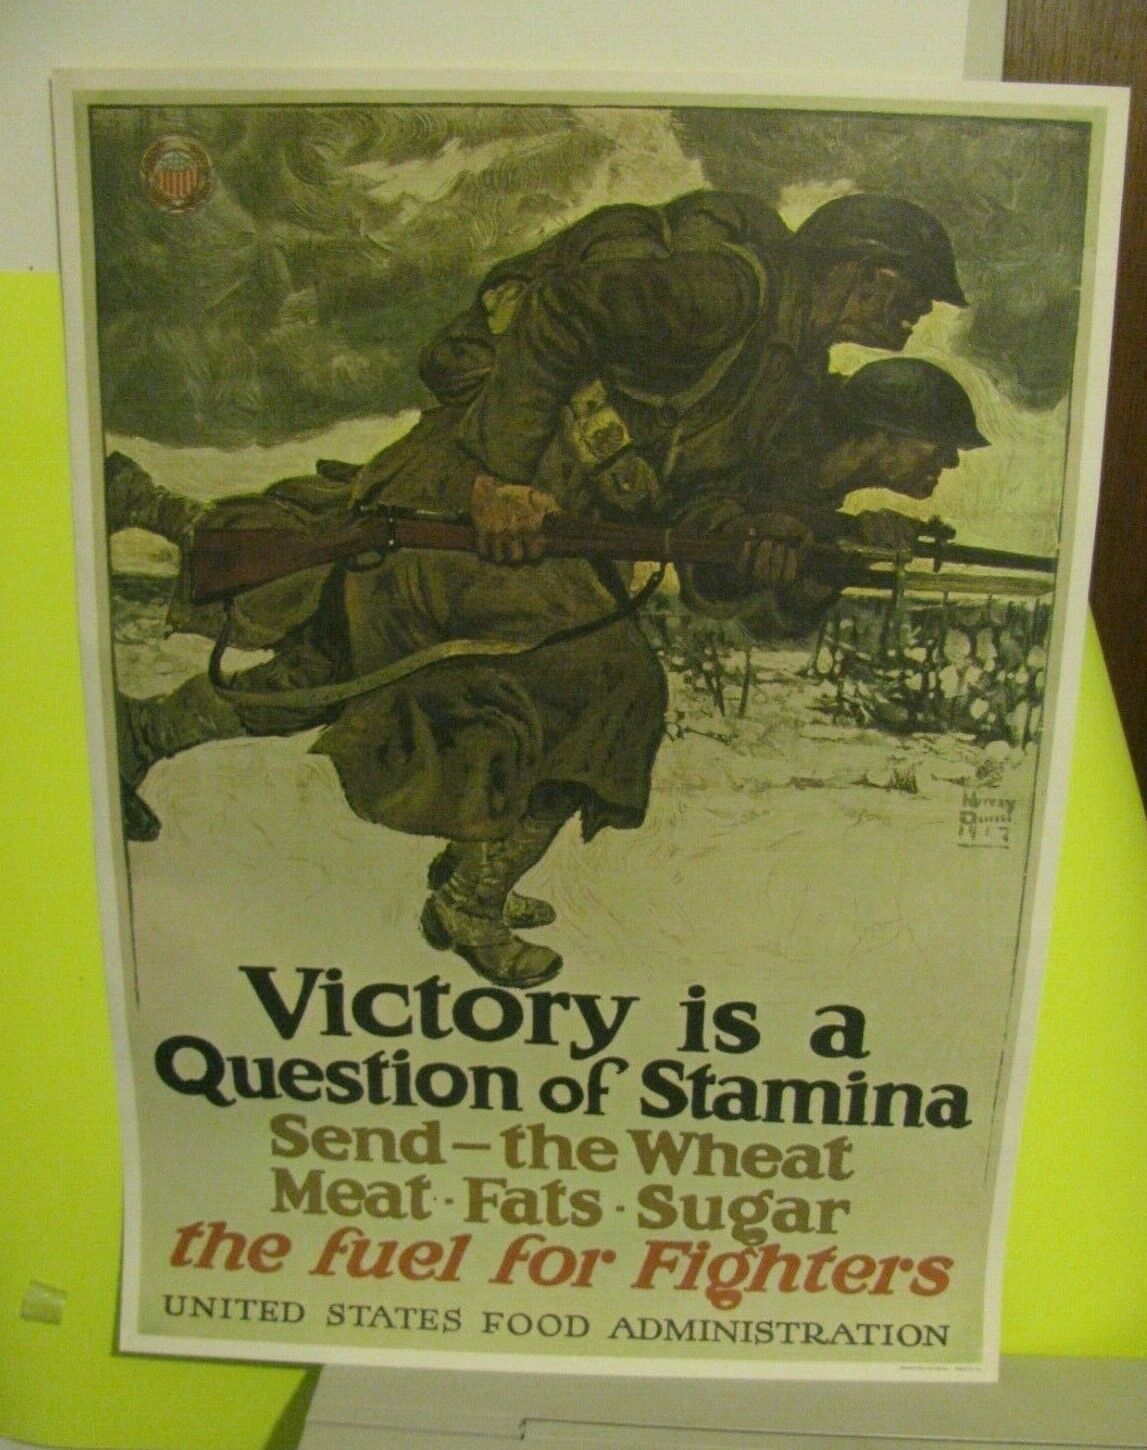 1964 Time Reprint Poster 1917 WWI US Food Admin Victory A Question of Stamina